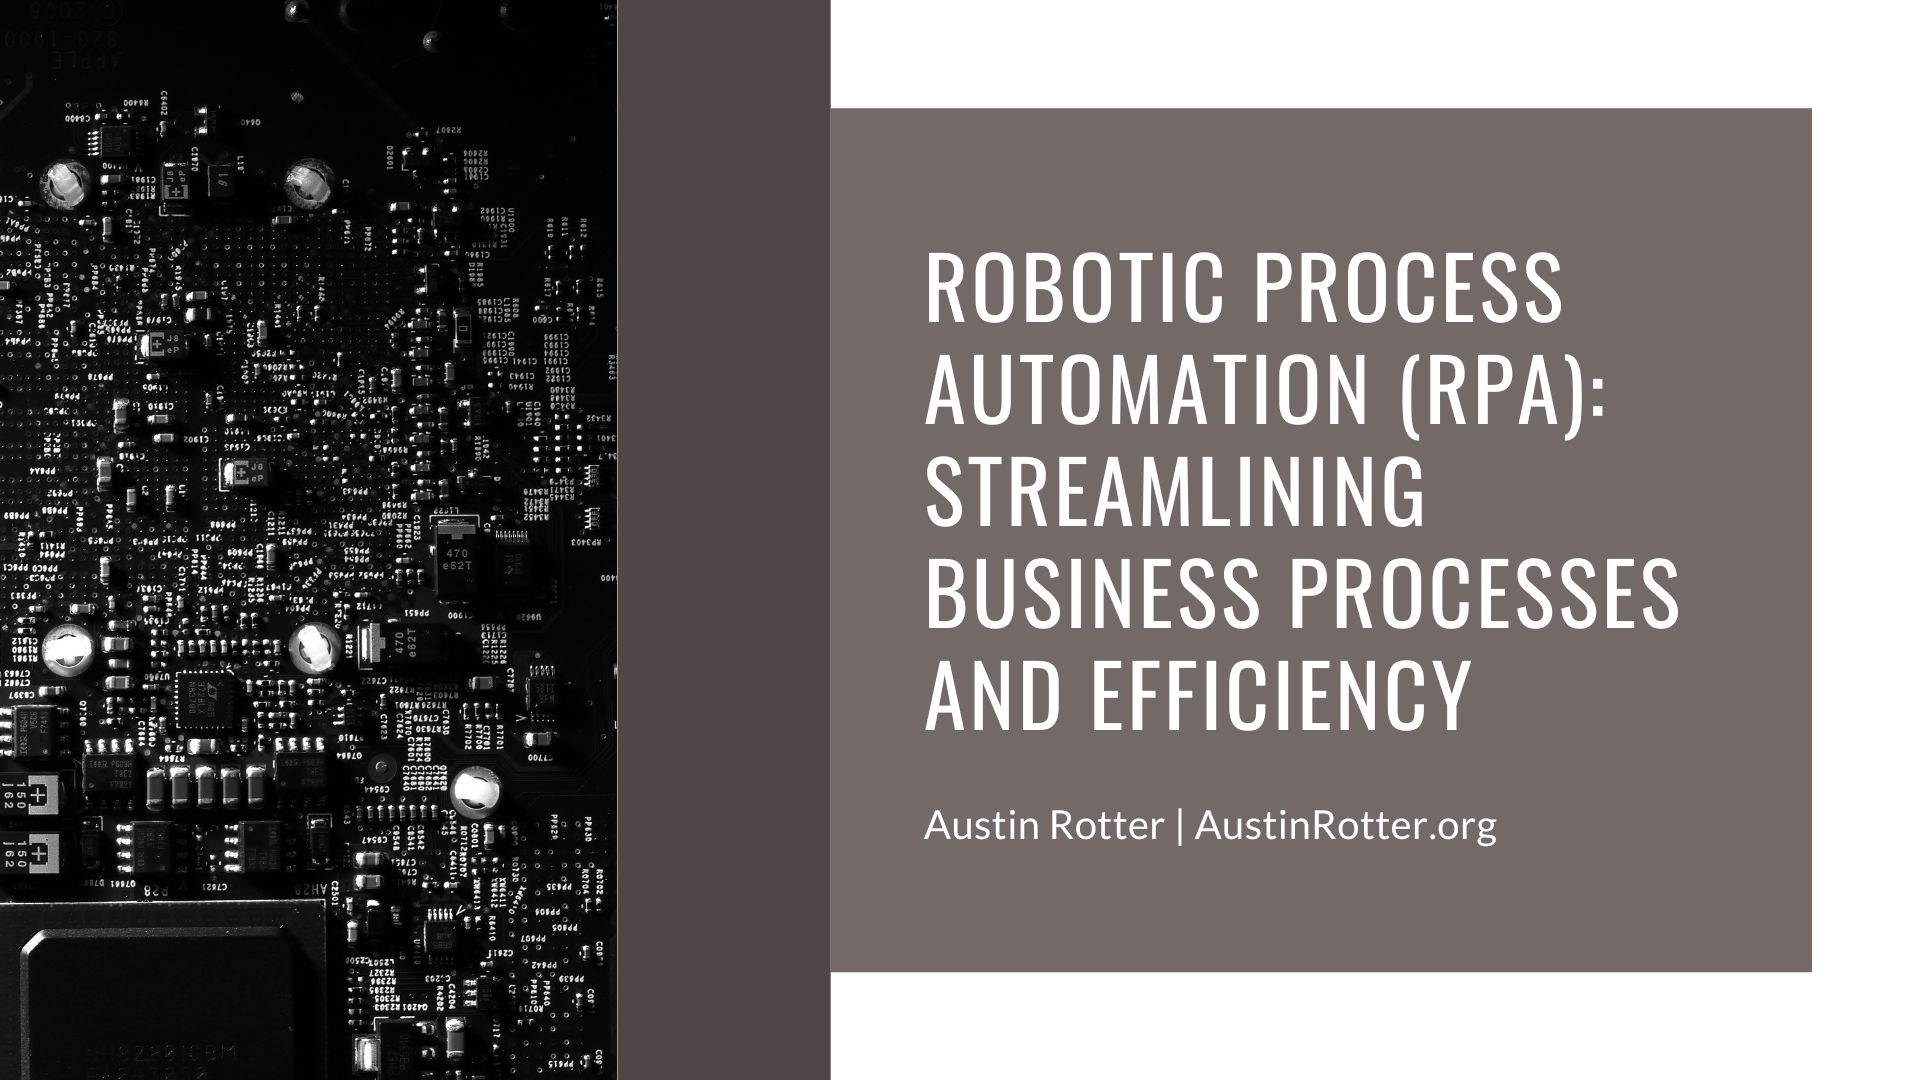 ROBOTIC PROCESS
AUTOMATION (RPA):
STREAMLINING
BUSINESS PROCESSES
AND EFFICIENCY

Austin Rotter | AustinRotter.org